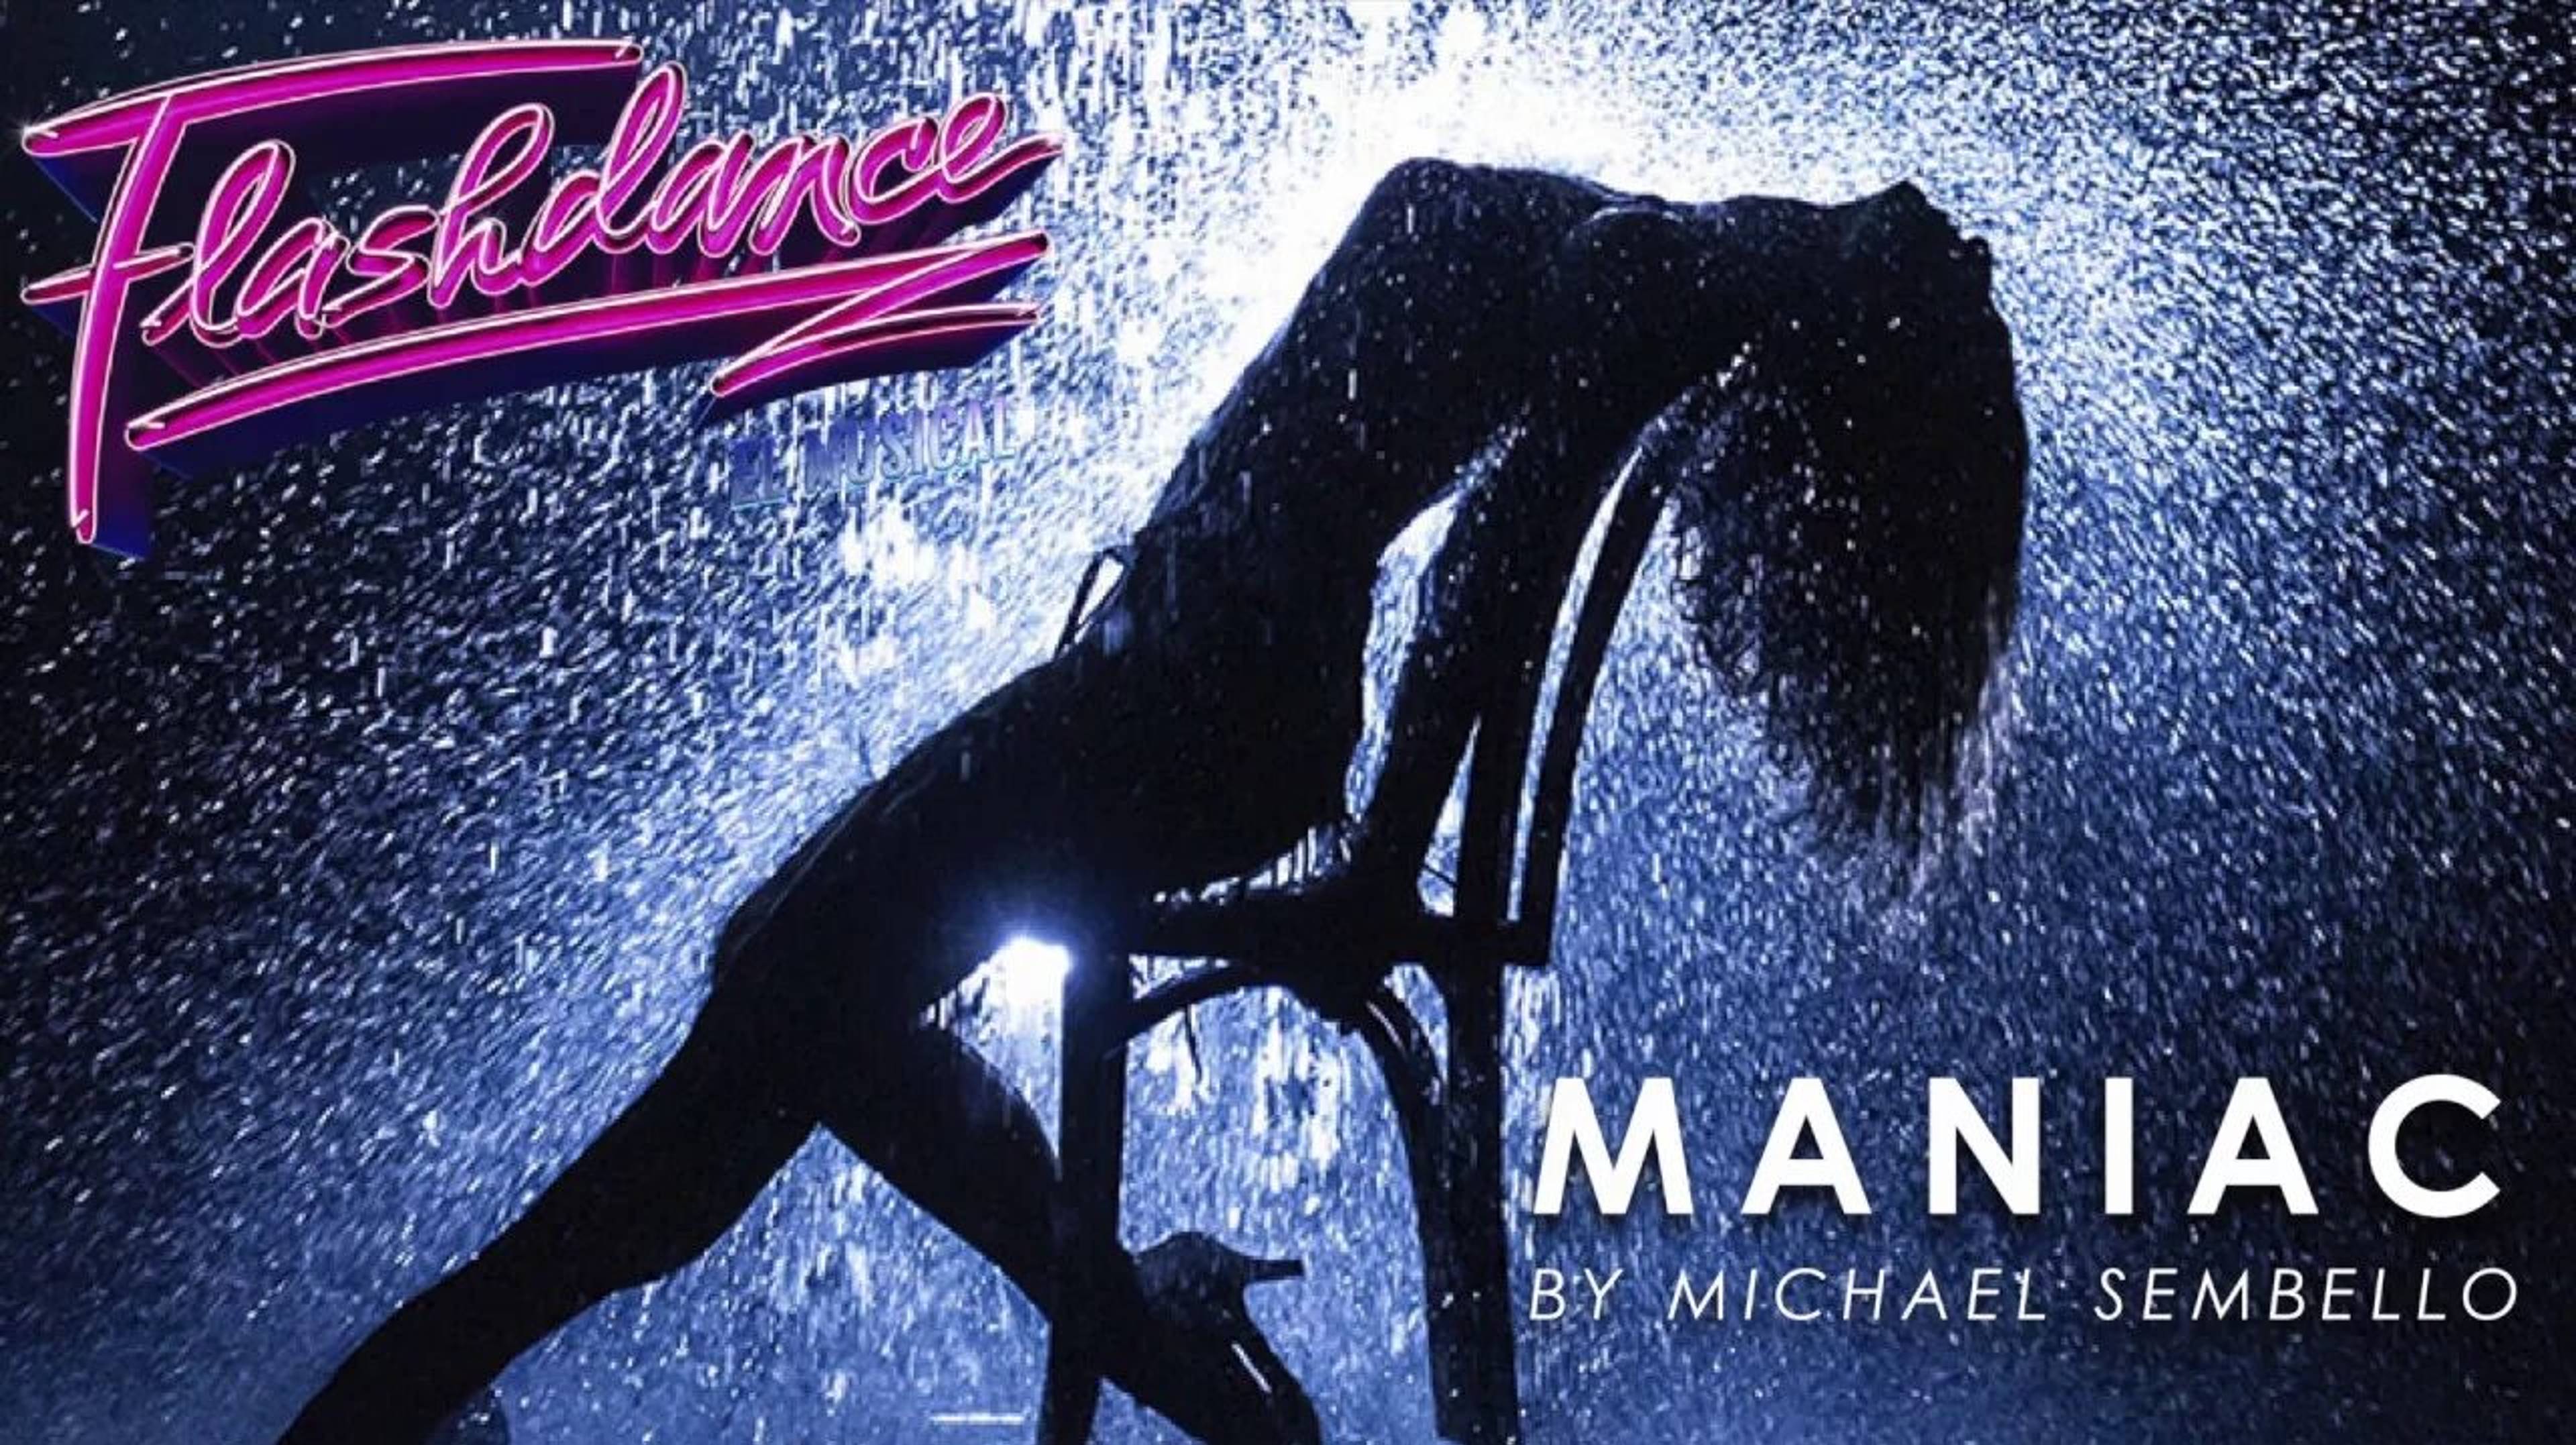 048 💪🥁🎸 Michael Sembello - Maniac [From Flashdance] Live Official Music Video 1983 Video Full HD